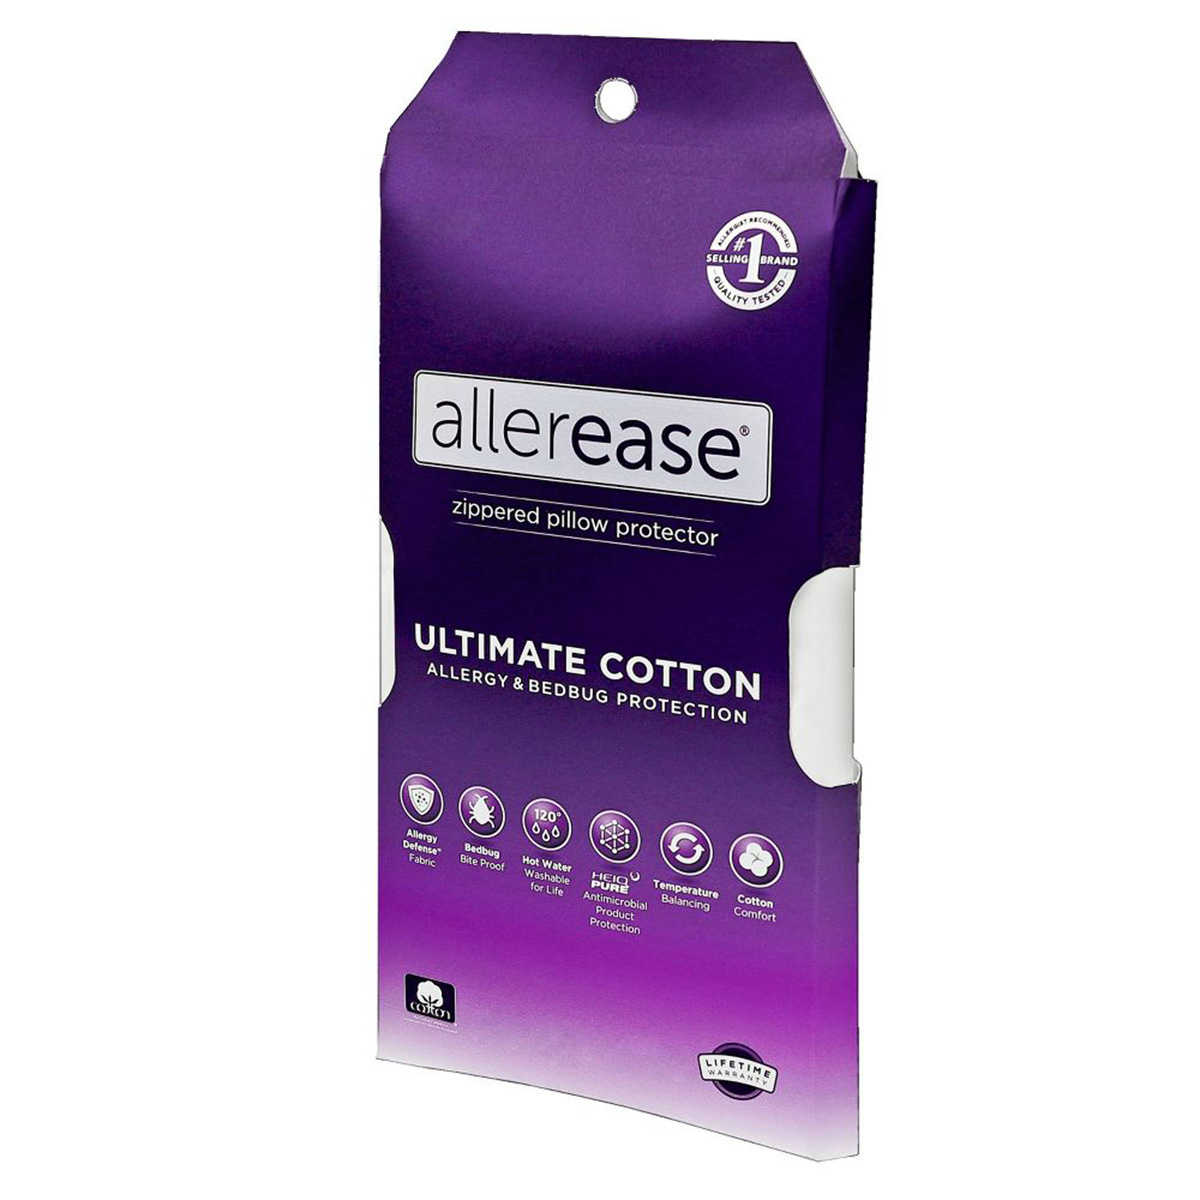 Allerease Ultimate Cotton Pillow Cover